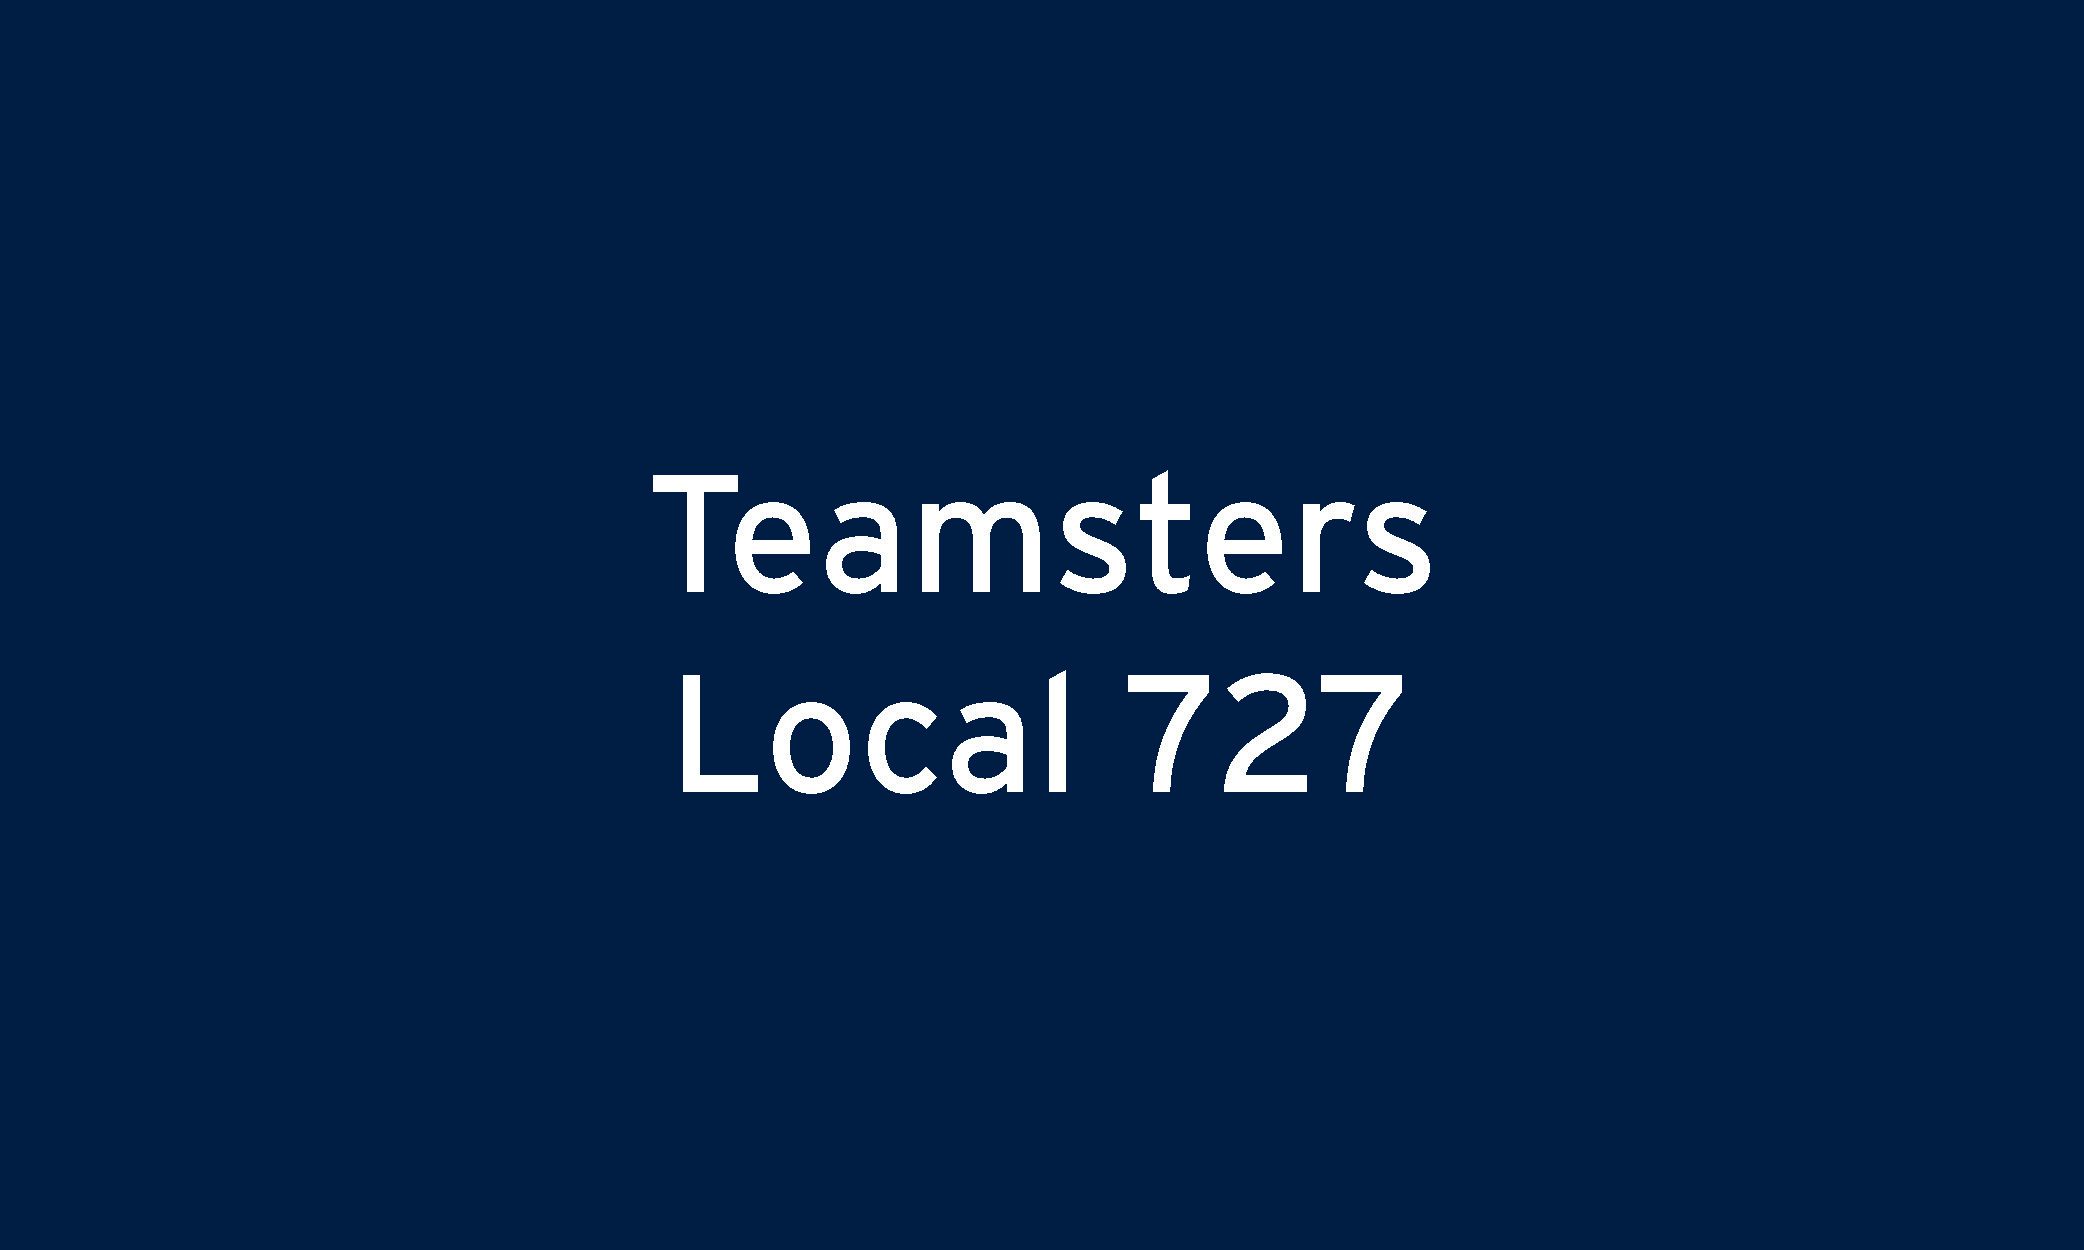 Teamsters Local 727